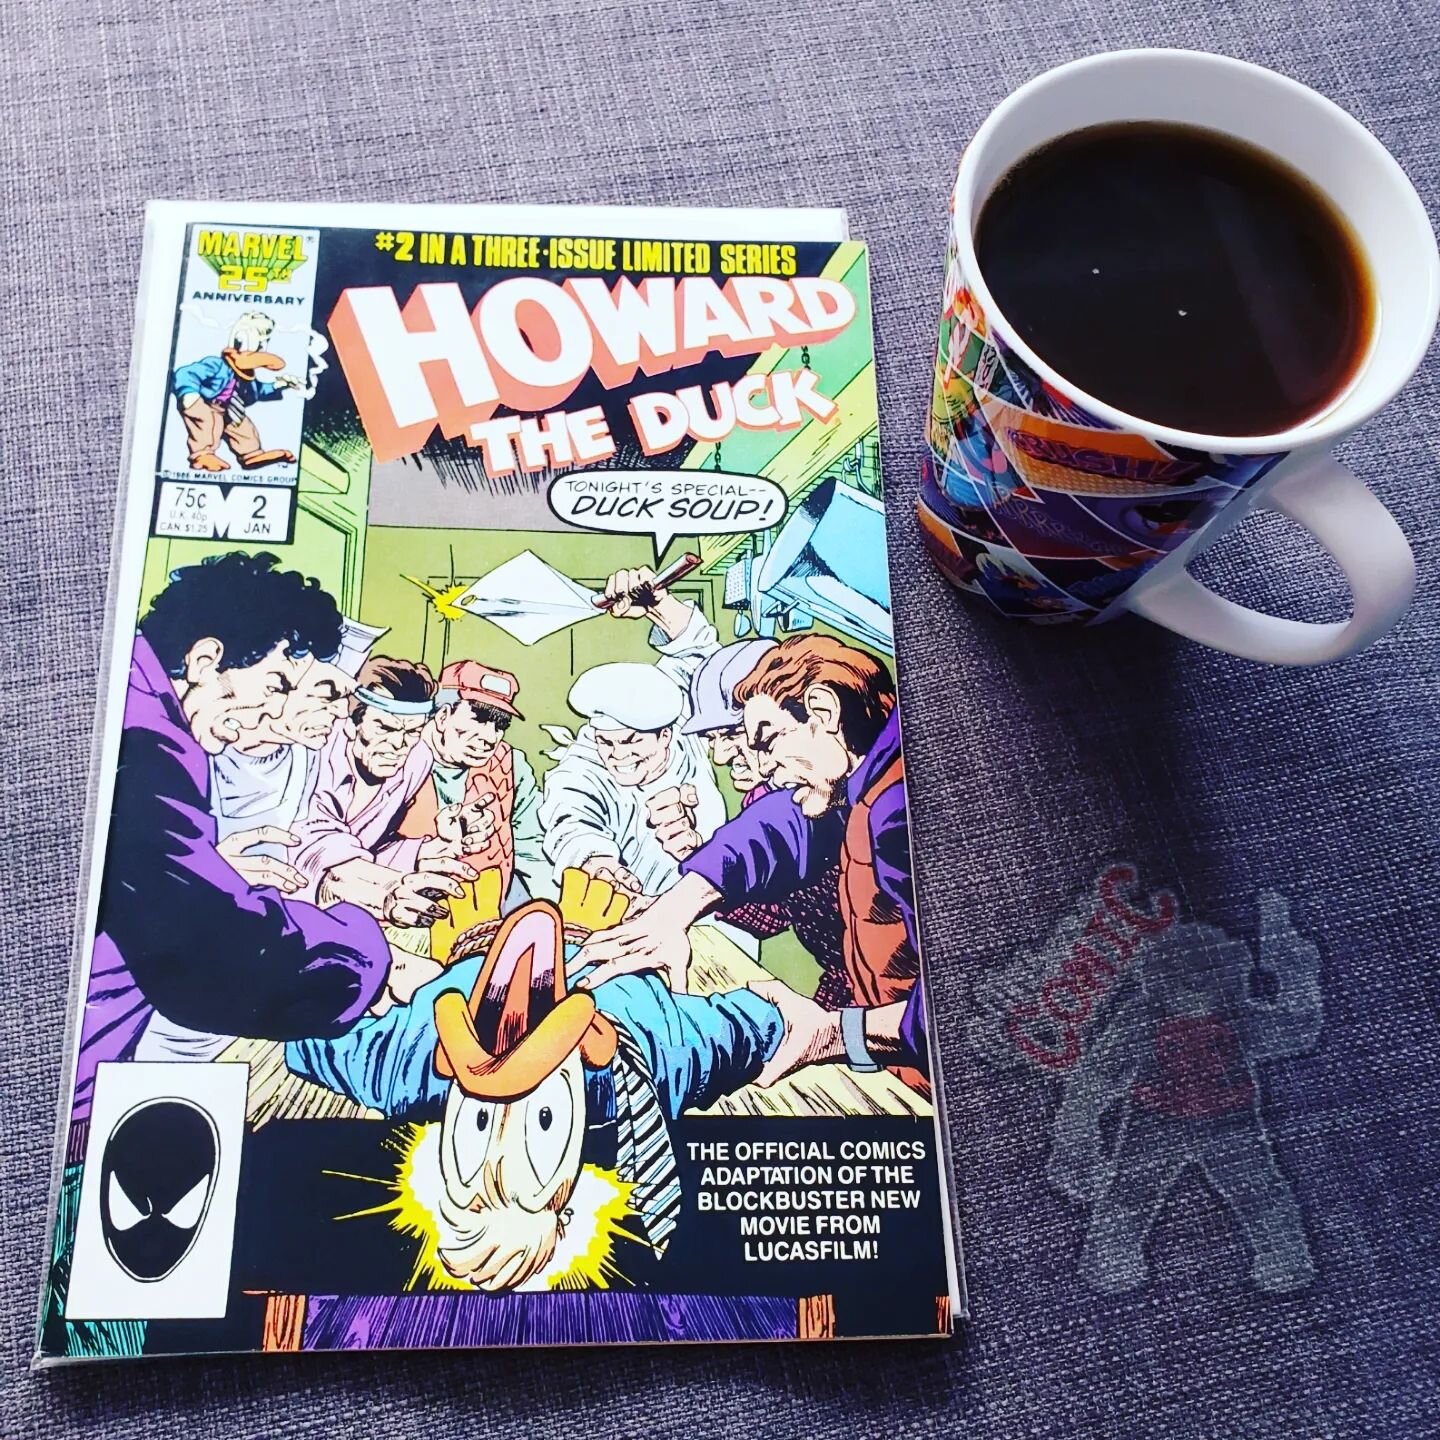 Today's Coffee ☕️ and Comic 📚  is Howard the Duck: The Movie adaption #2! 
Adapted by Danny Fingeroth and featuring art by Kyle Baker, this issue brings Howard the Duck face-to-face with the world in an official comic book adaptation of the blockbus